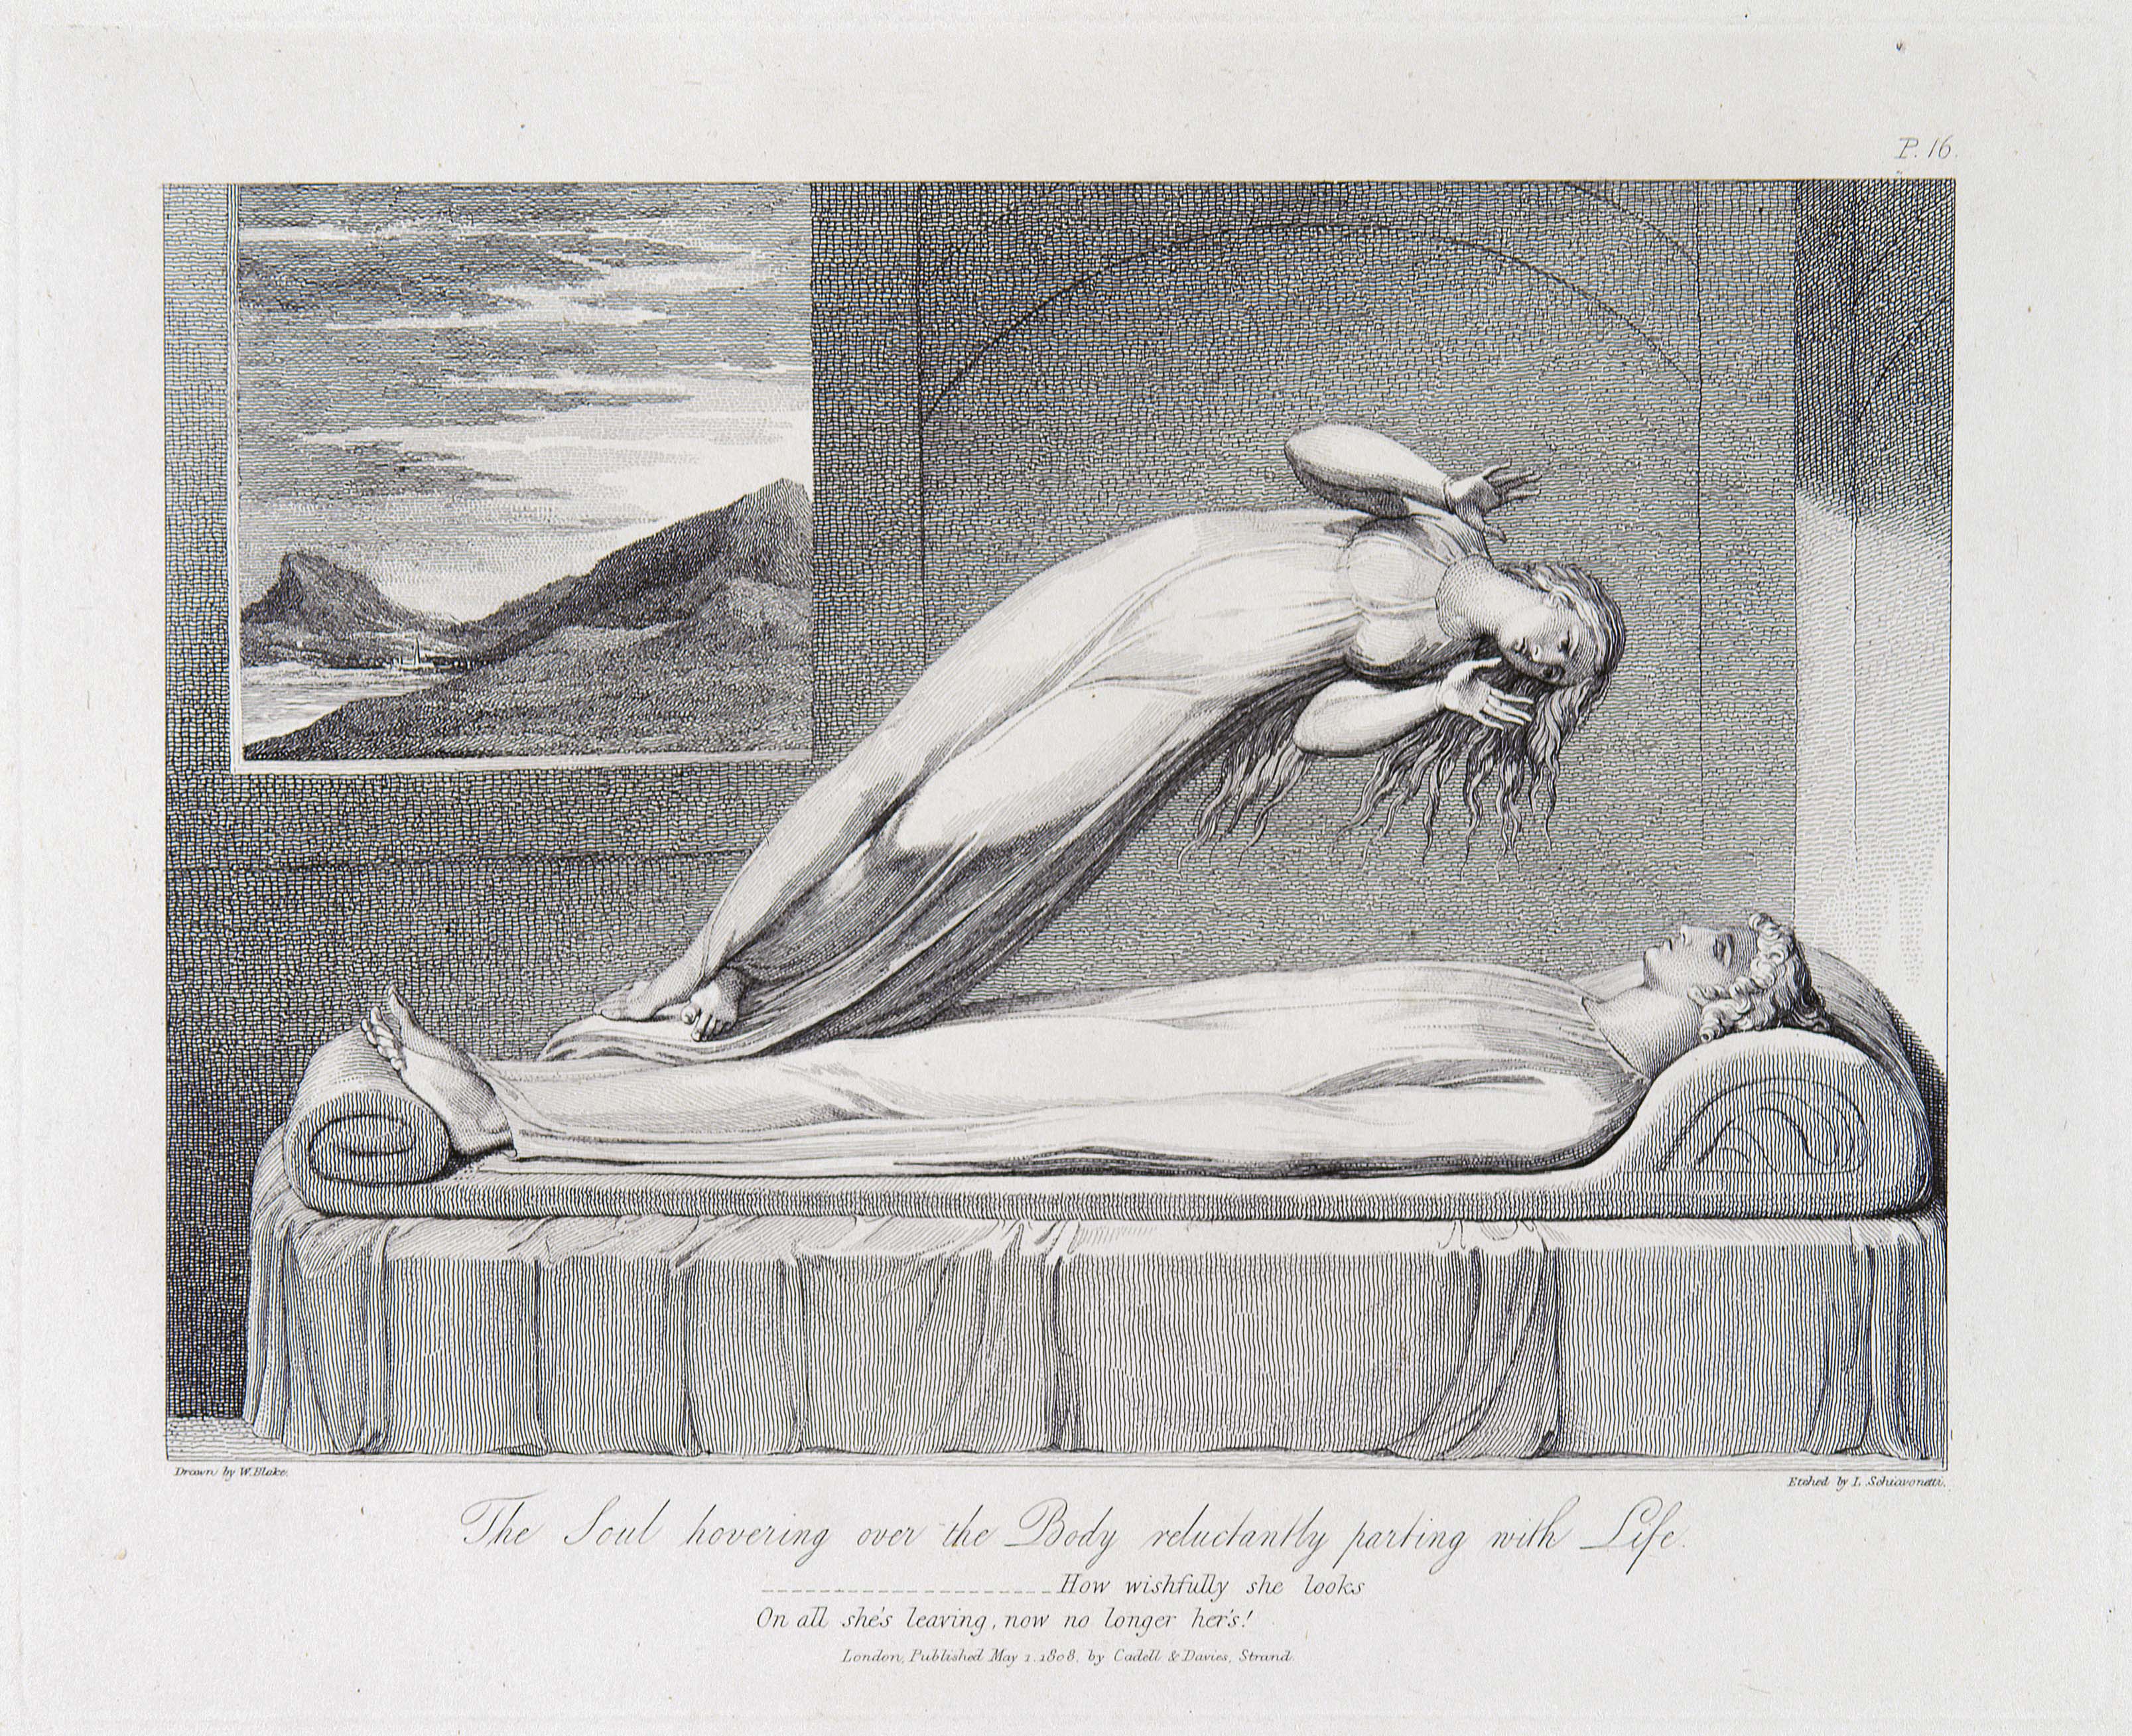 Robert Blair, The Grave, object 7 (Bentley435.6) The Soul hovering over the Body reluctantly parting with Life